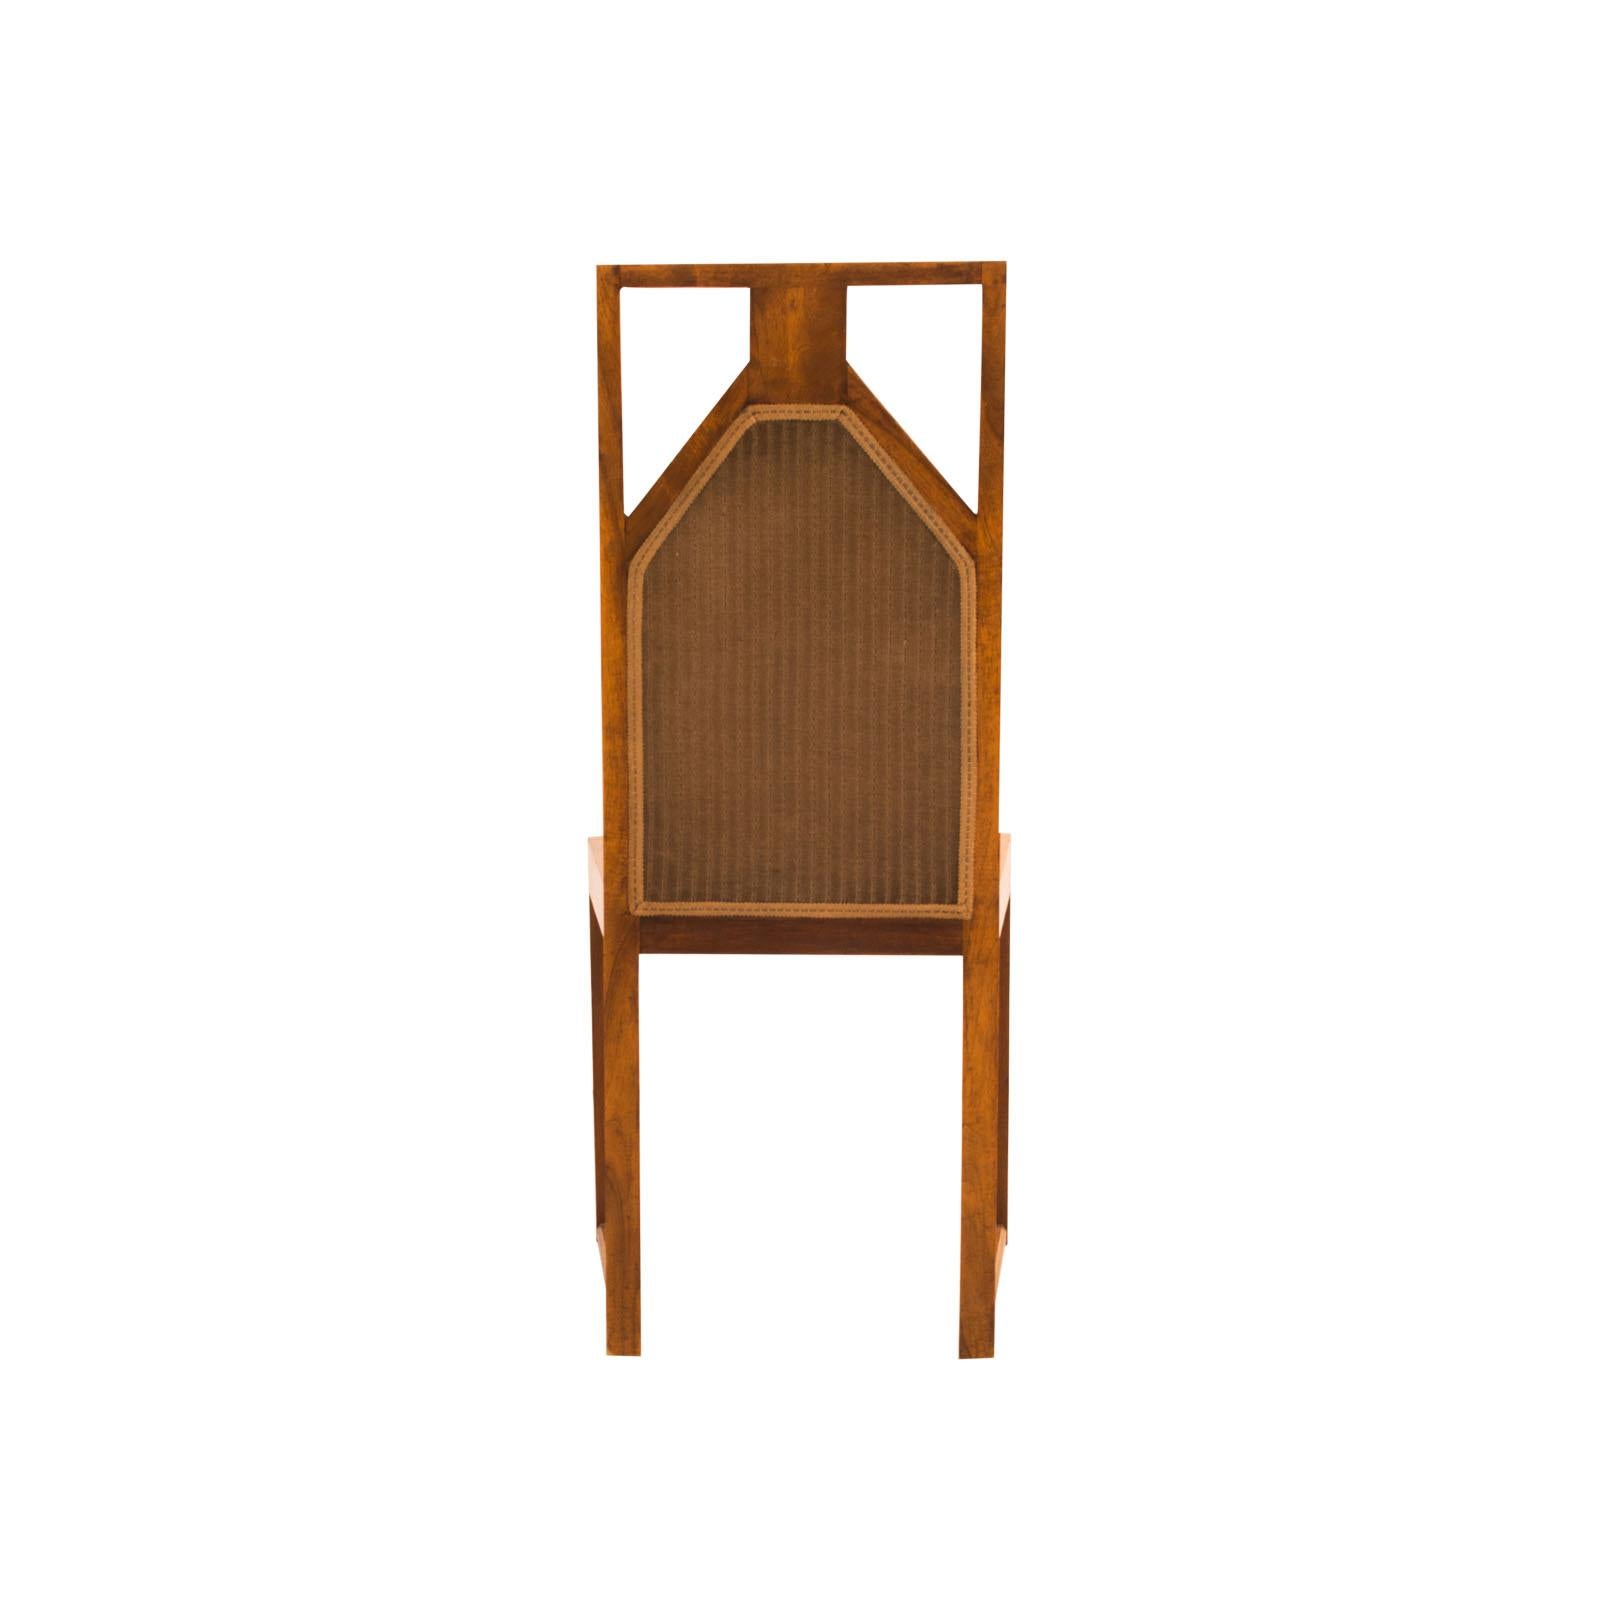 A pair of extraordinary chairs in the style of the early Josef Hoffmann furniture. The significant skids were used by Hoffmann in the early years of the Wiener Werkstätte from 1903 on. Decorative columns, high back-rest with a geometric pattern. Can